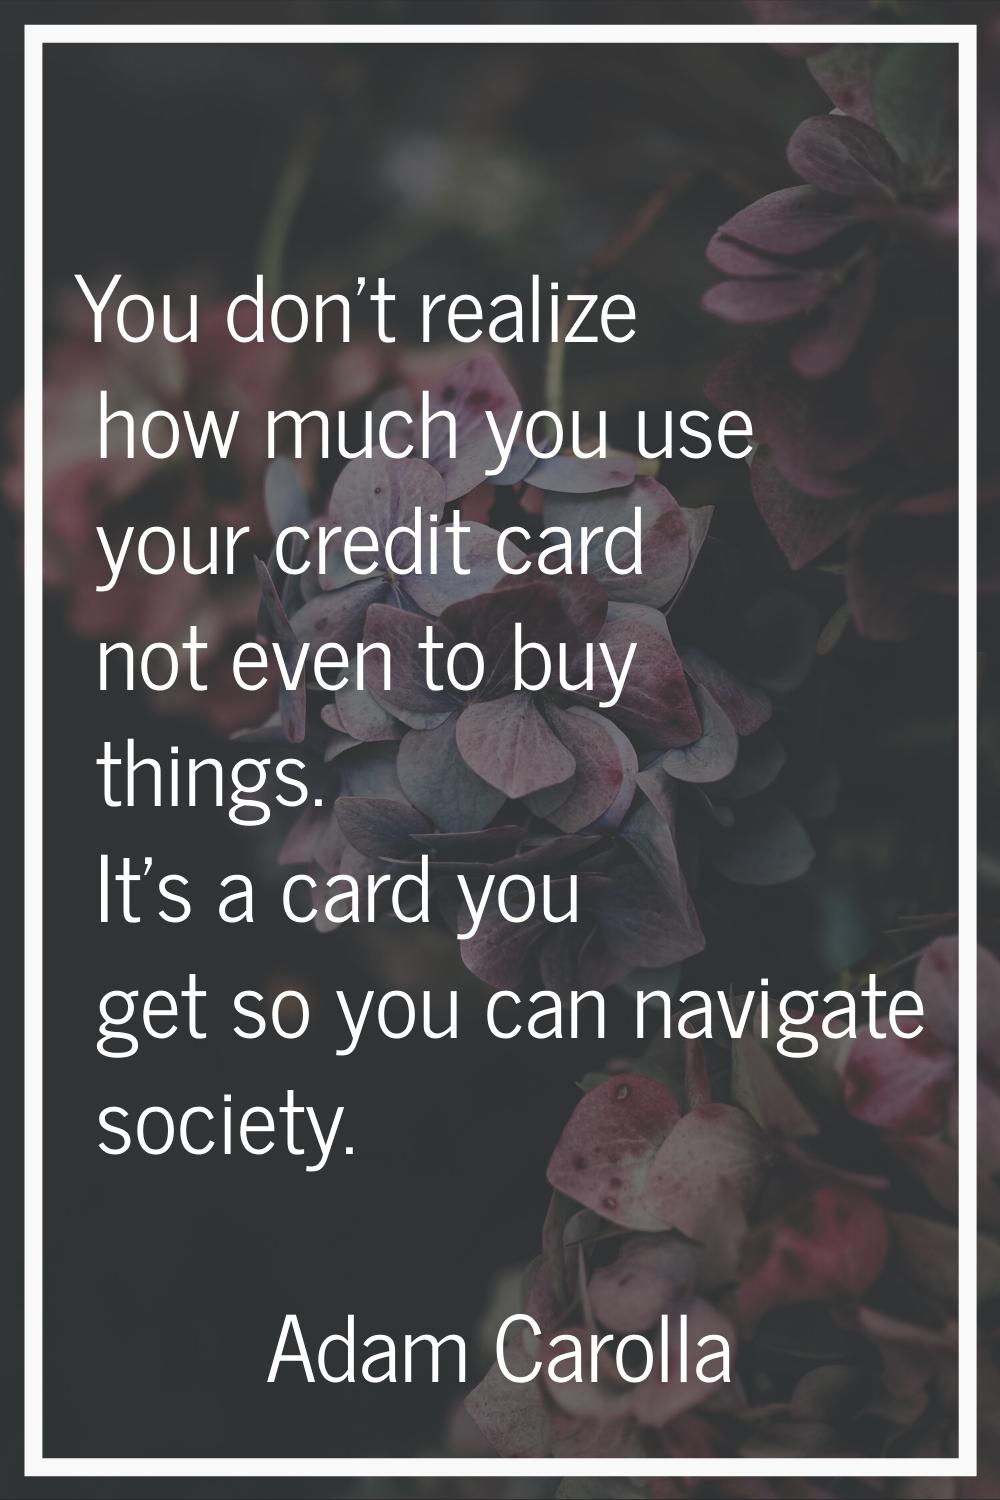 You don't realize how much you use your credit card not even to buy things. It's a card you get so 